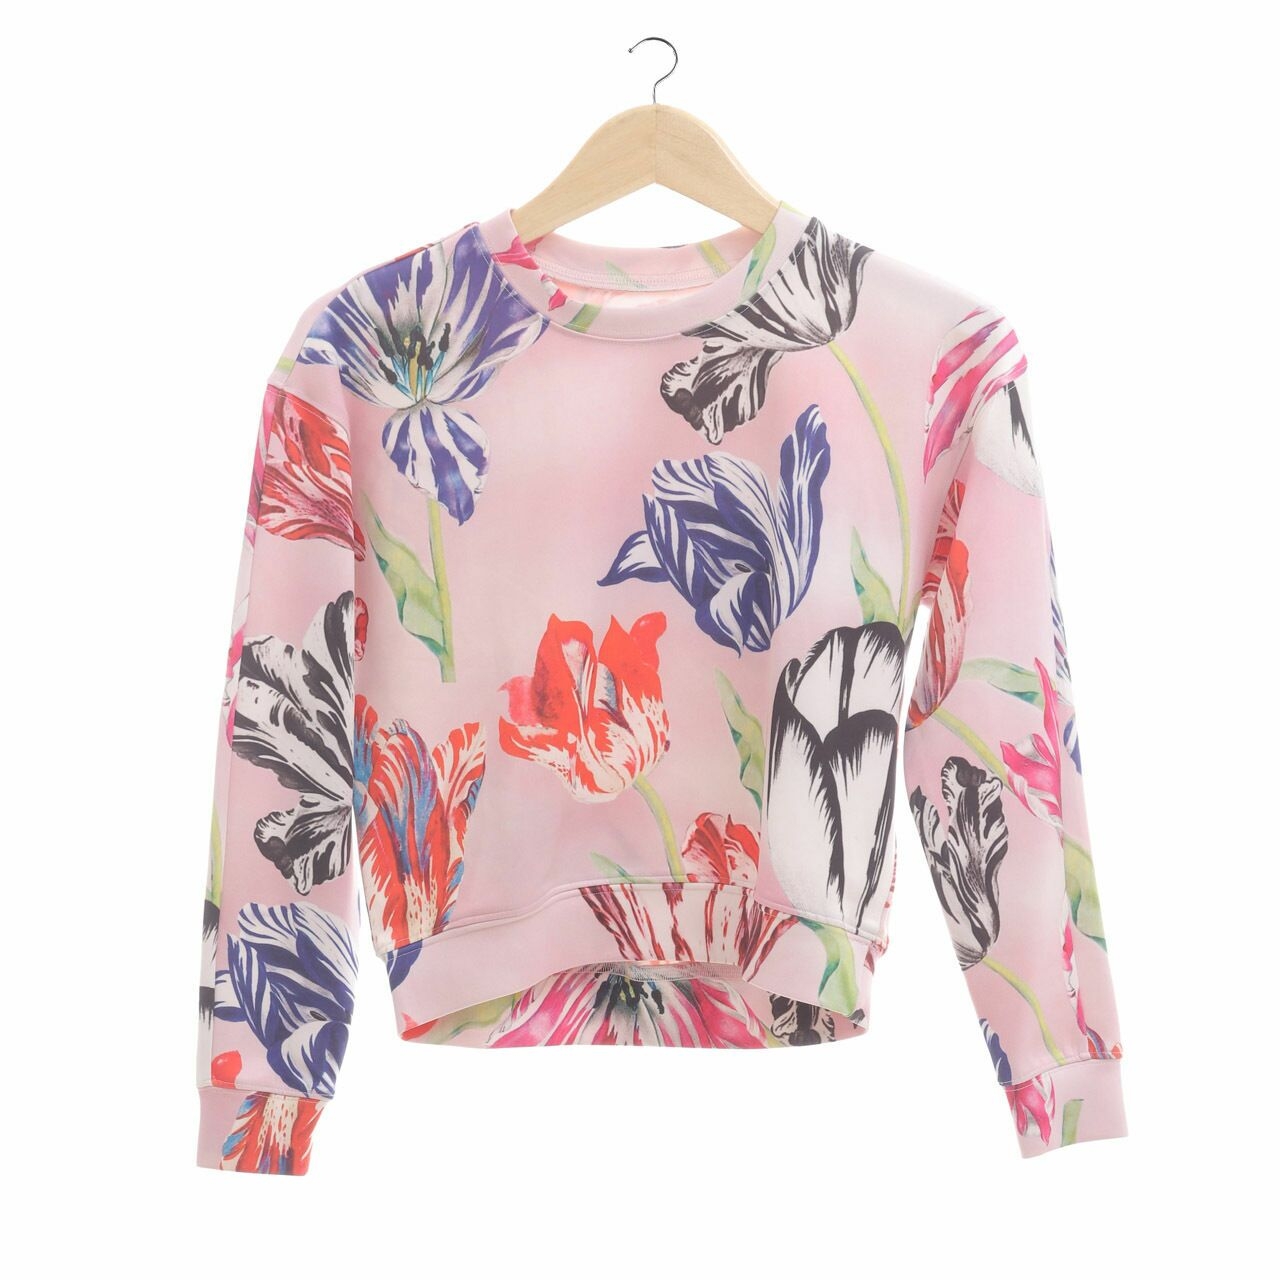 MTWTFSS WeekDay Multi Floral Blouse